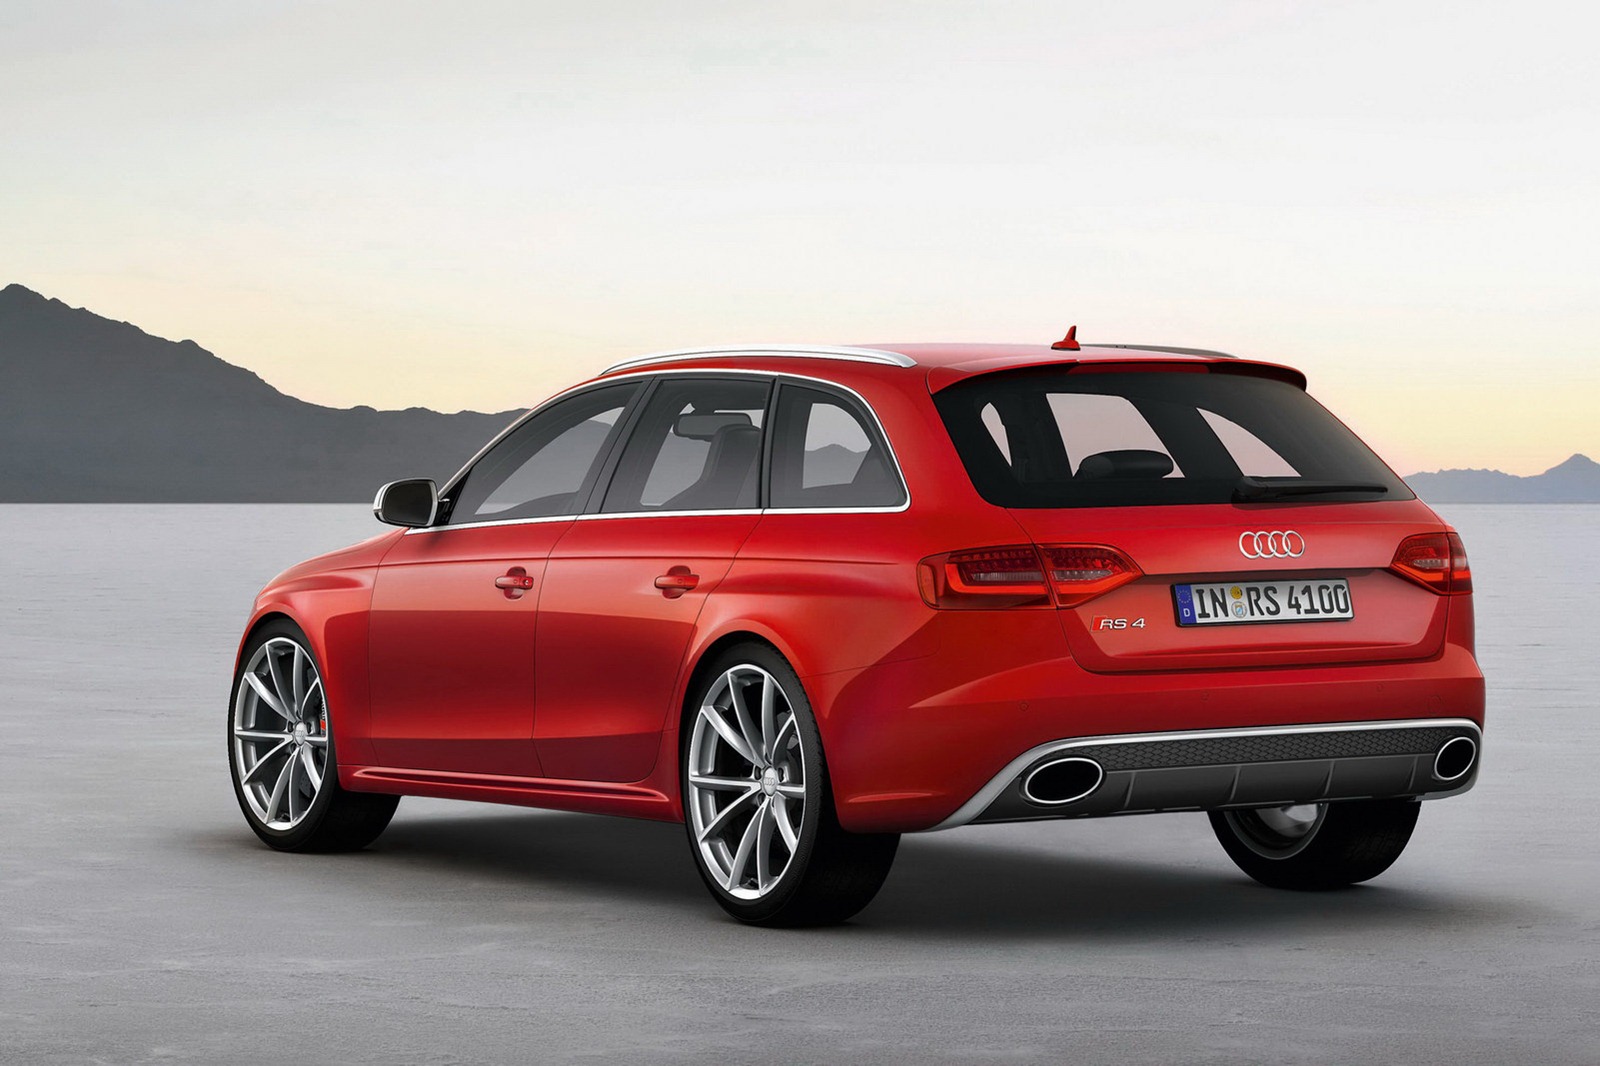 2013 audi rs4 avant on sale in the uk from